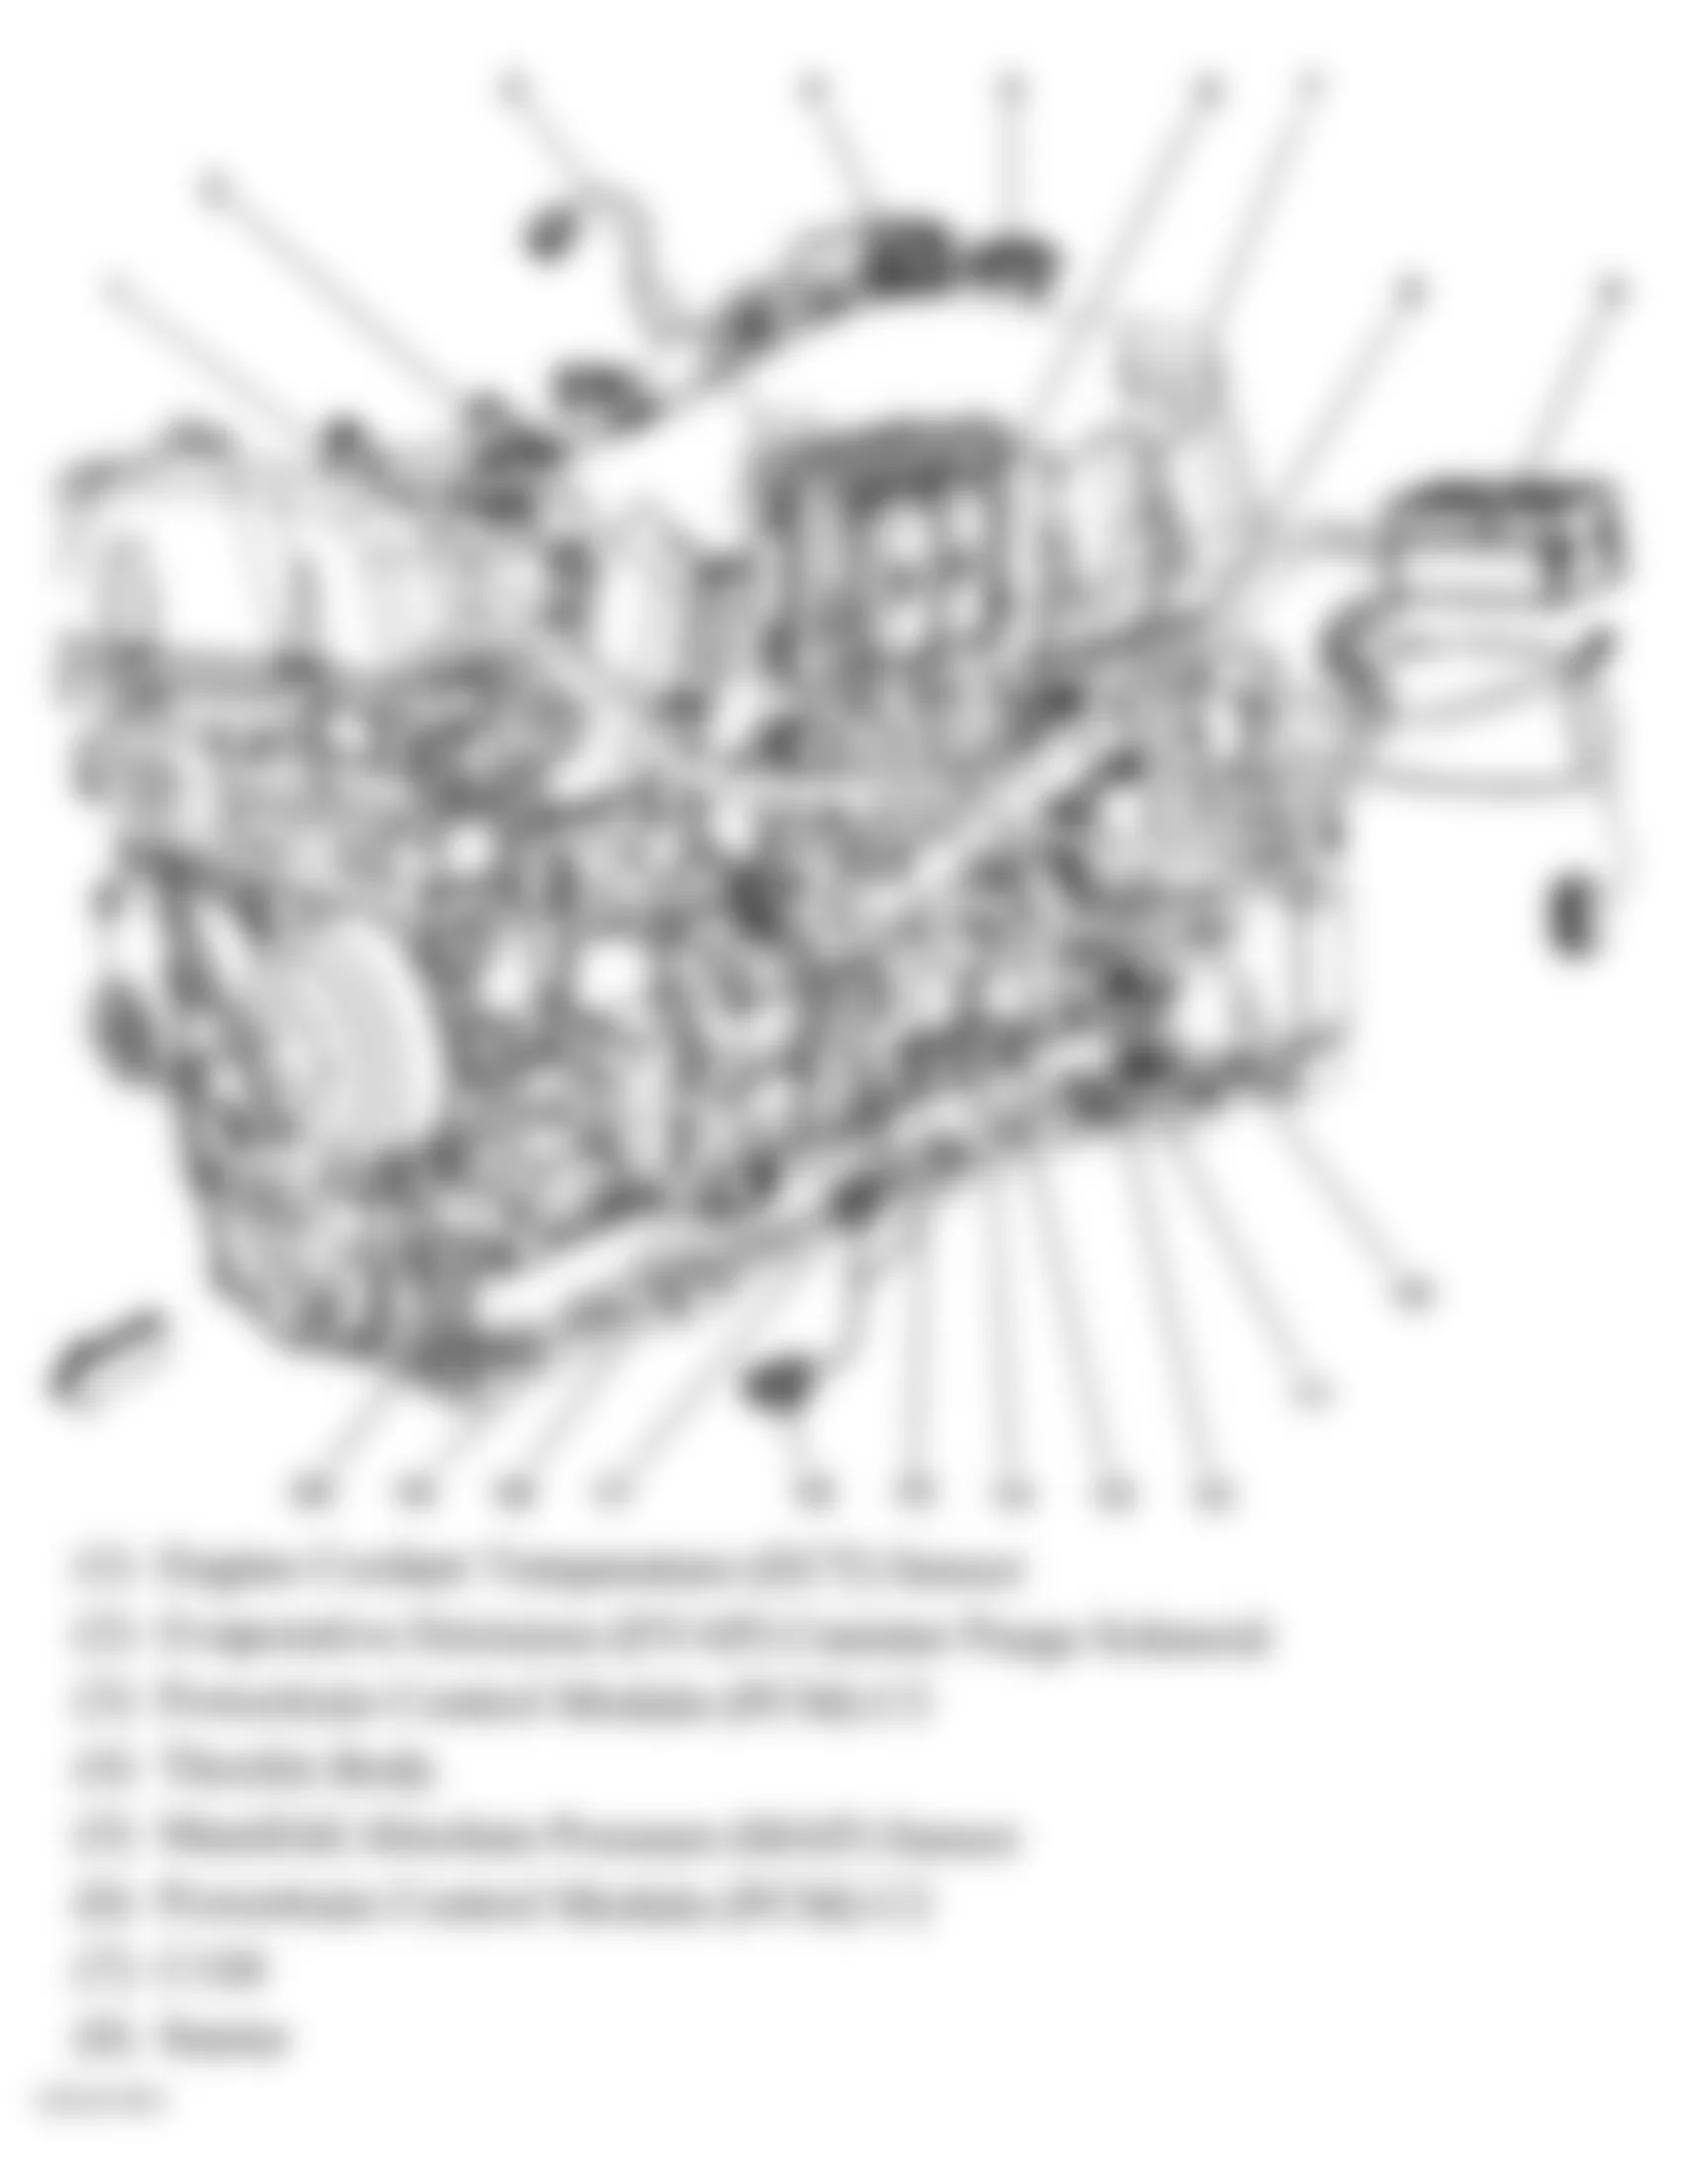 GMC Envoy XL 2006 - Component Locations -  Left Side Of Engine (4.2L) (1 Of 2)